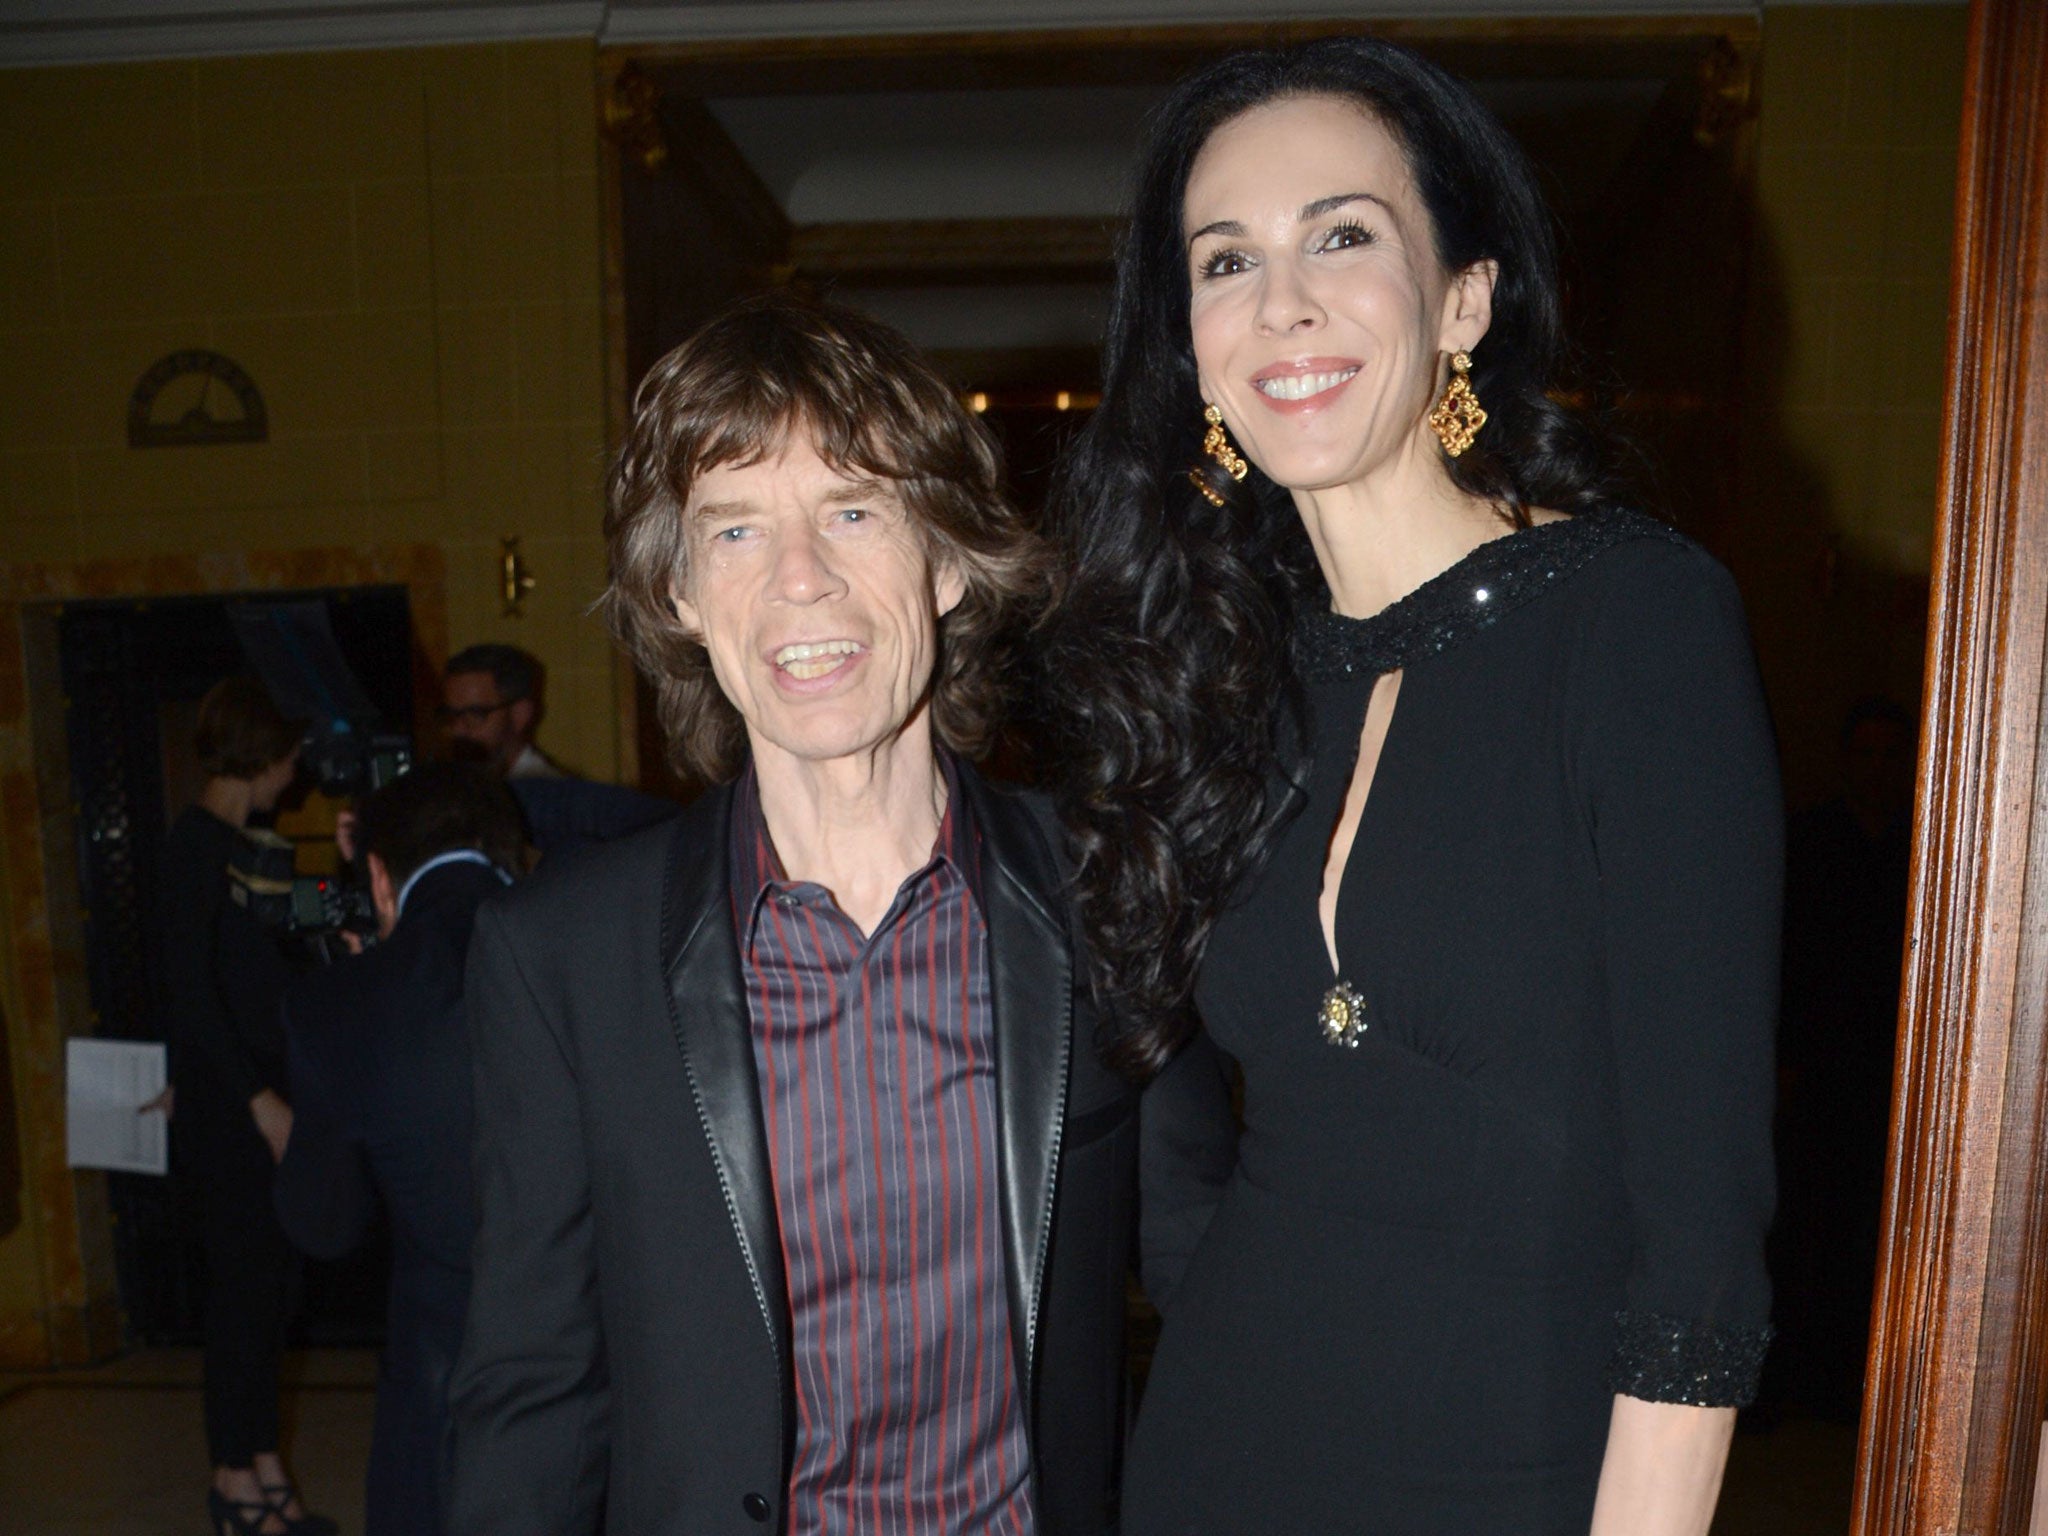 L'Wren Scott and Mick Jagger were together for 13 years